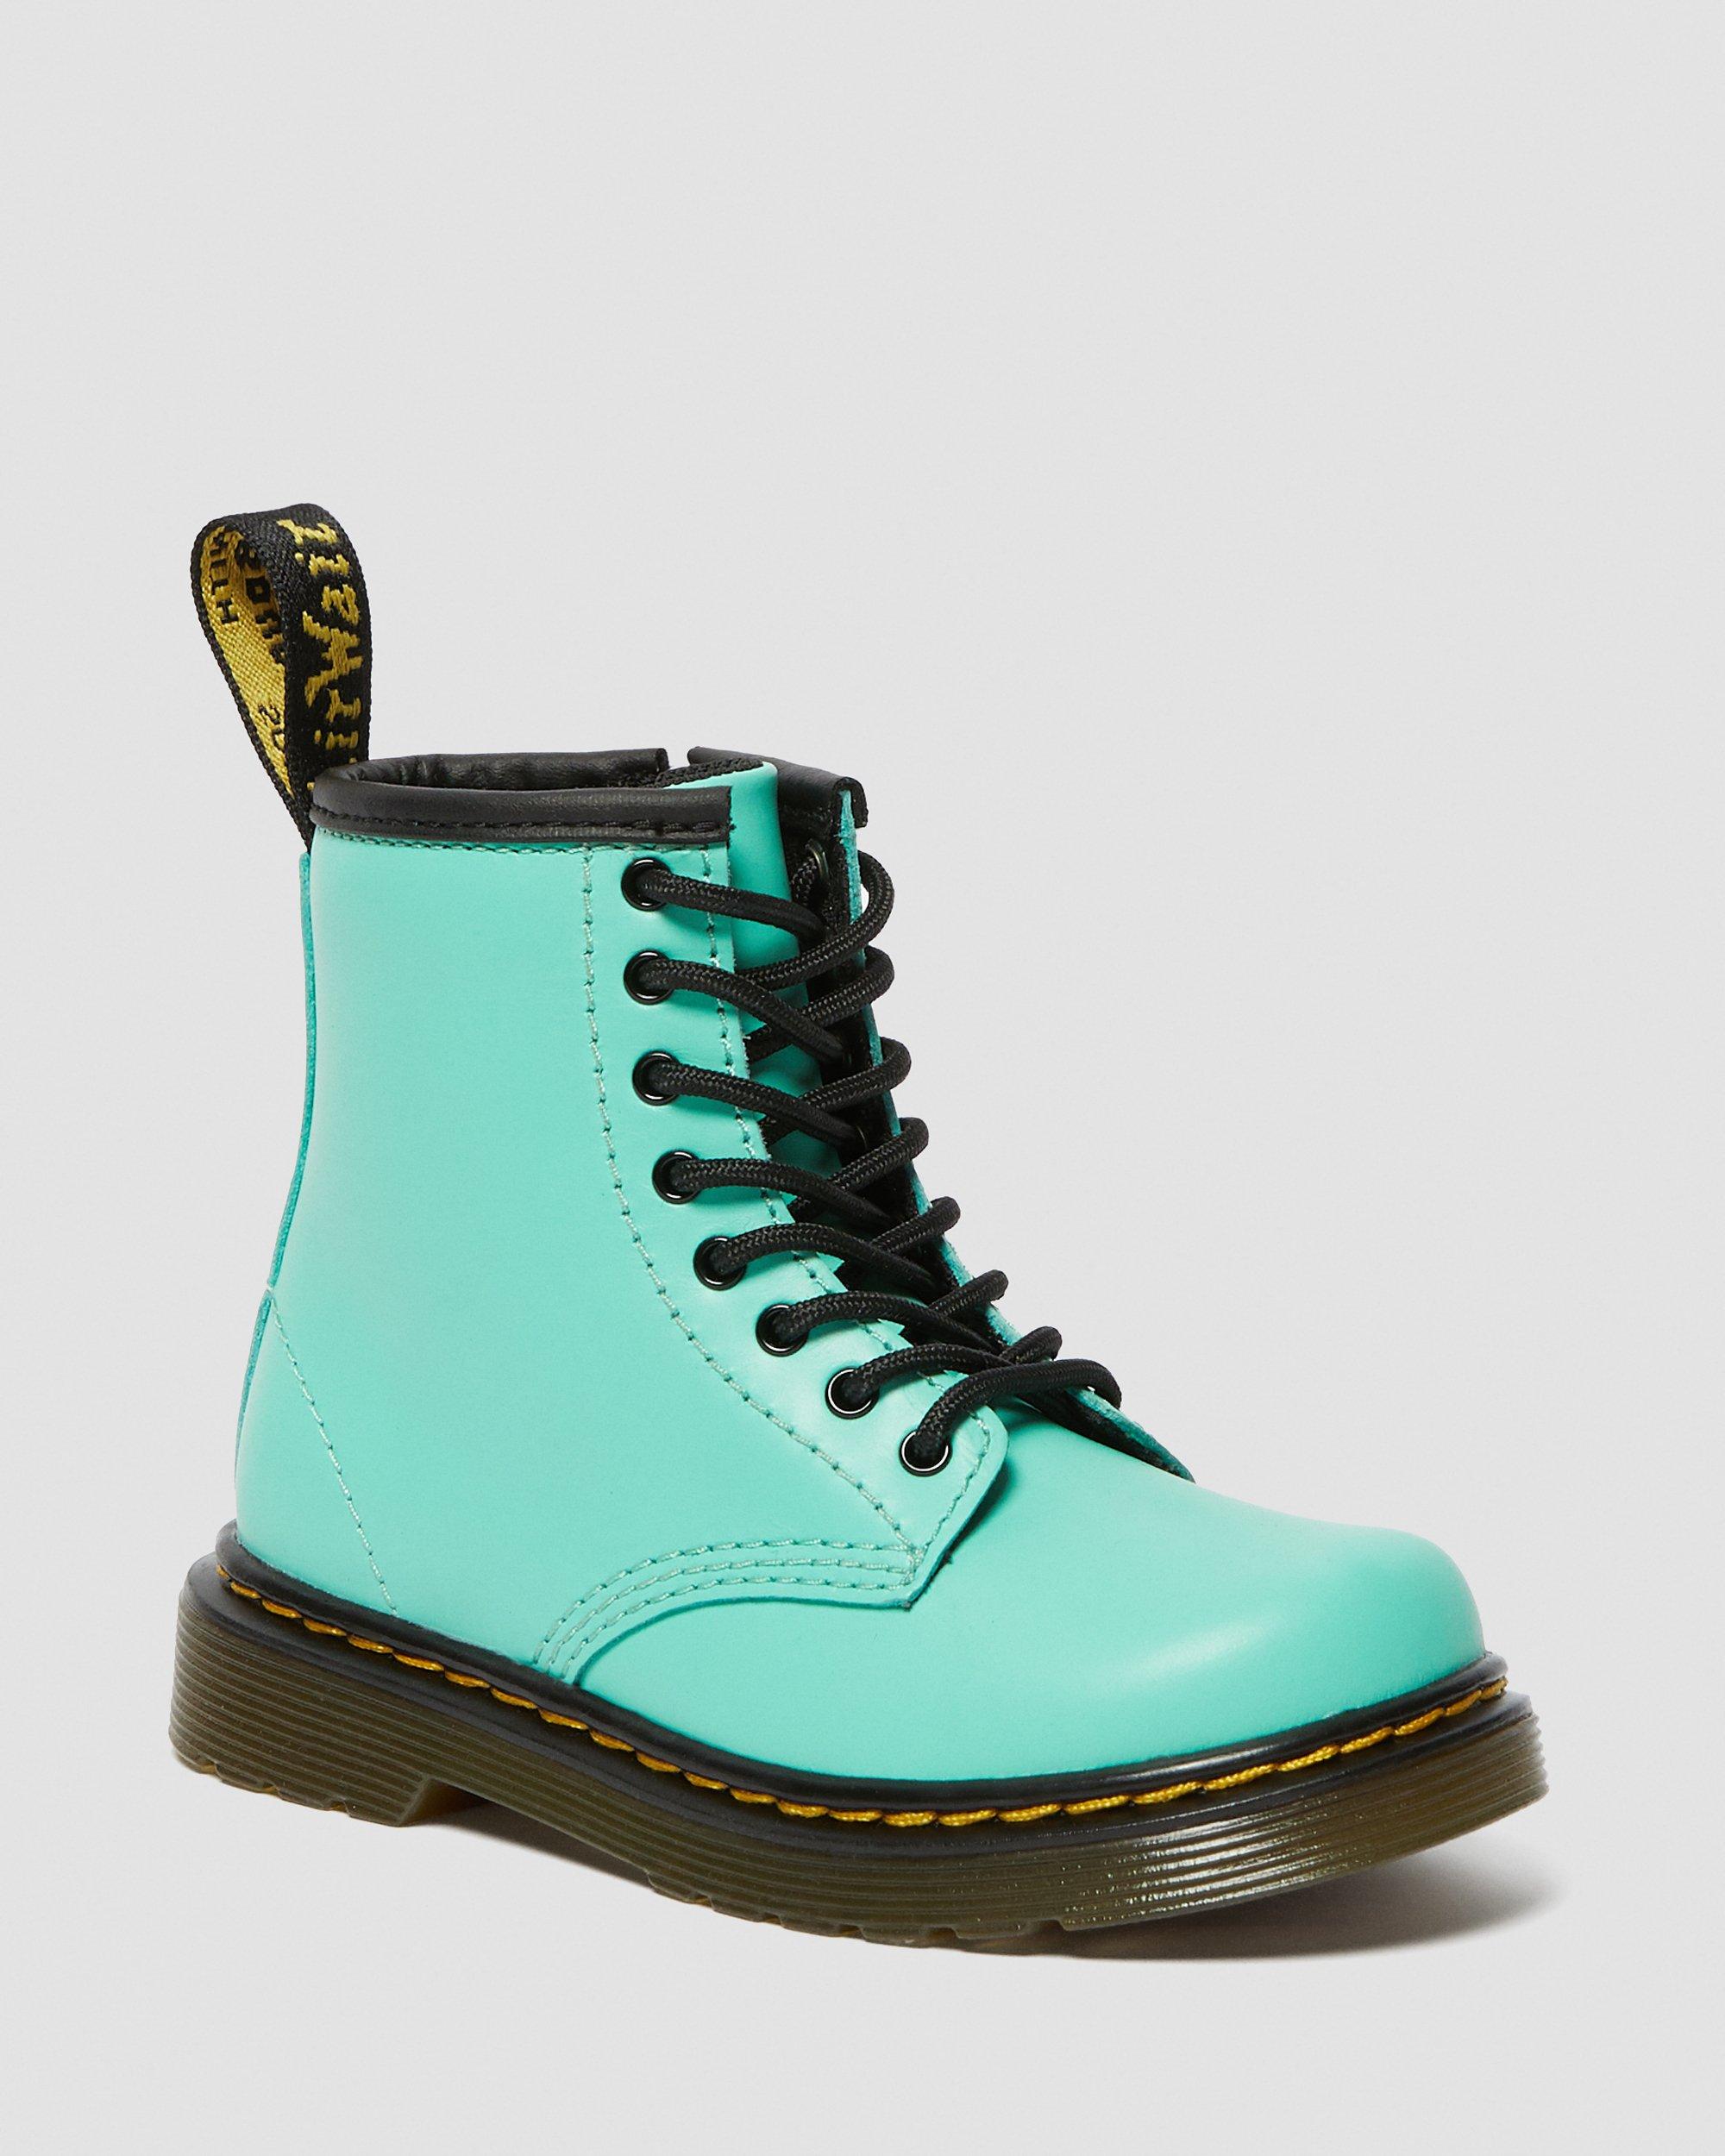 Toddler 1460 Muted Leather Lace Up Boots in Peppermint Green